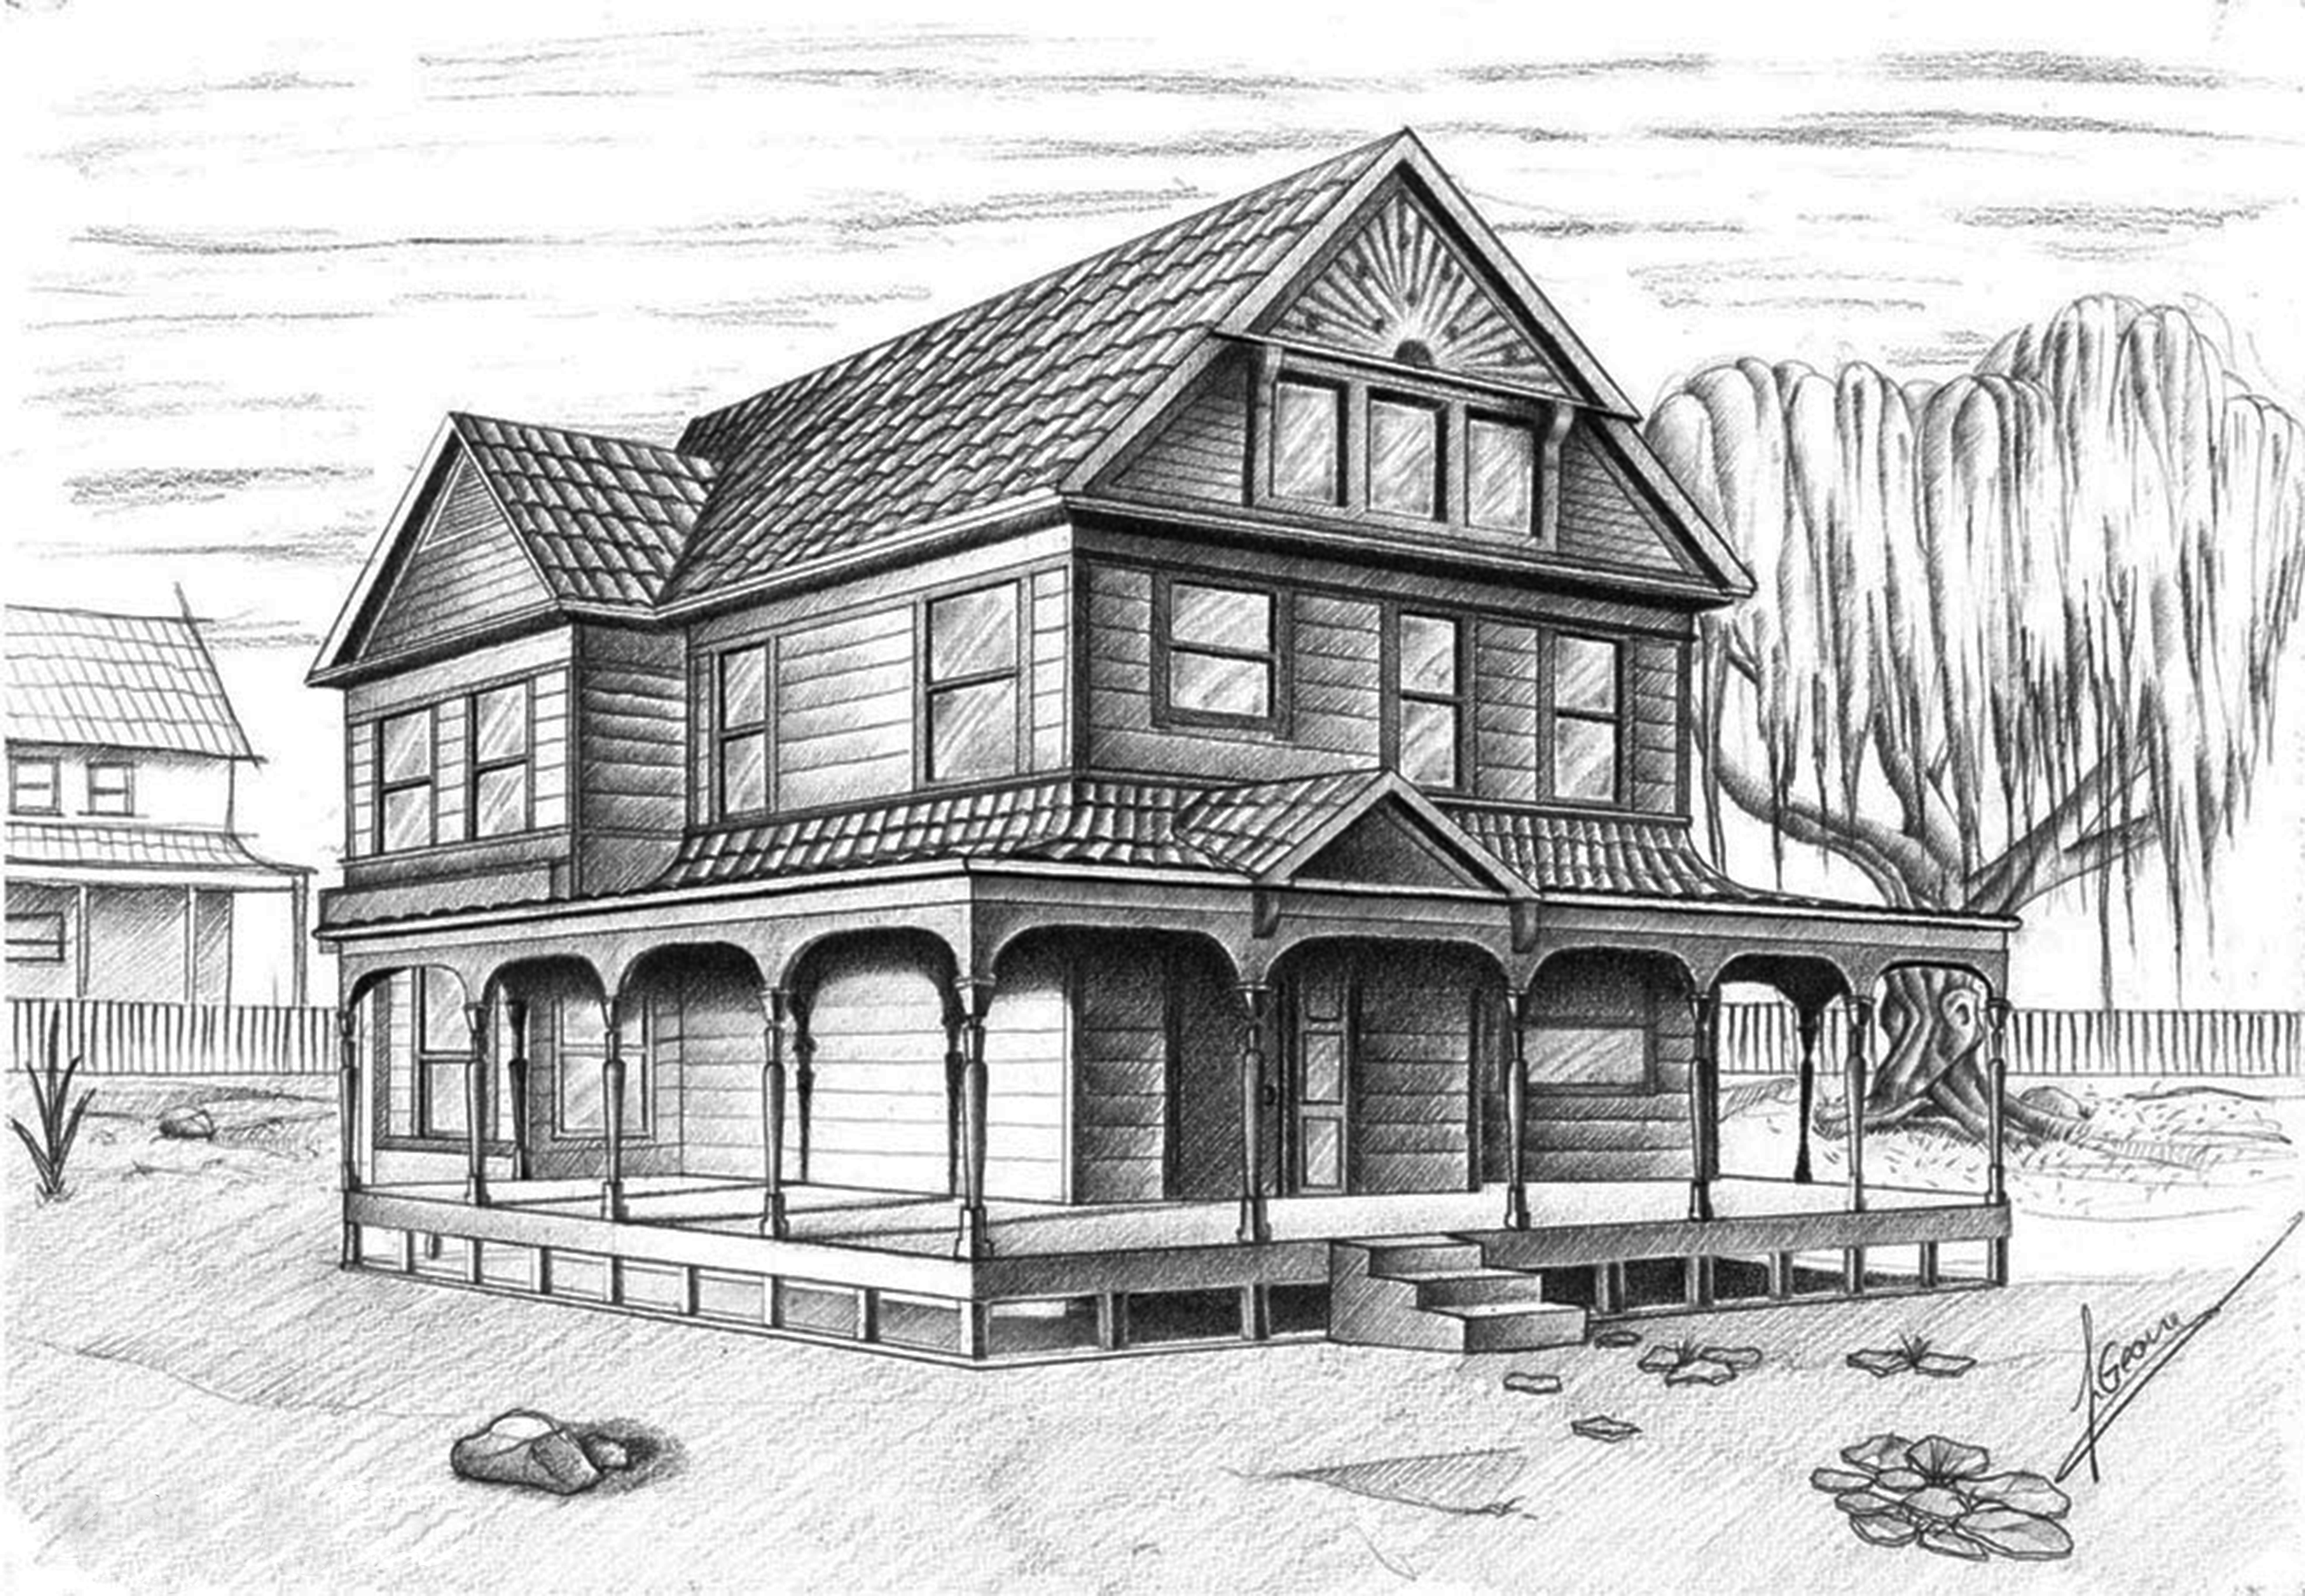  Dream House Drawing Easy Sketch with Pencil